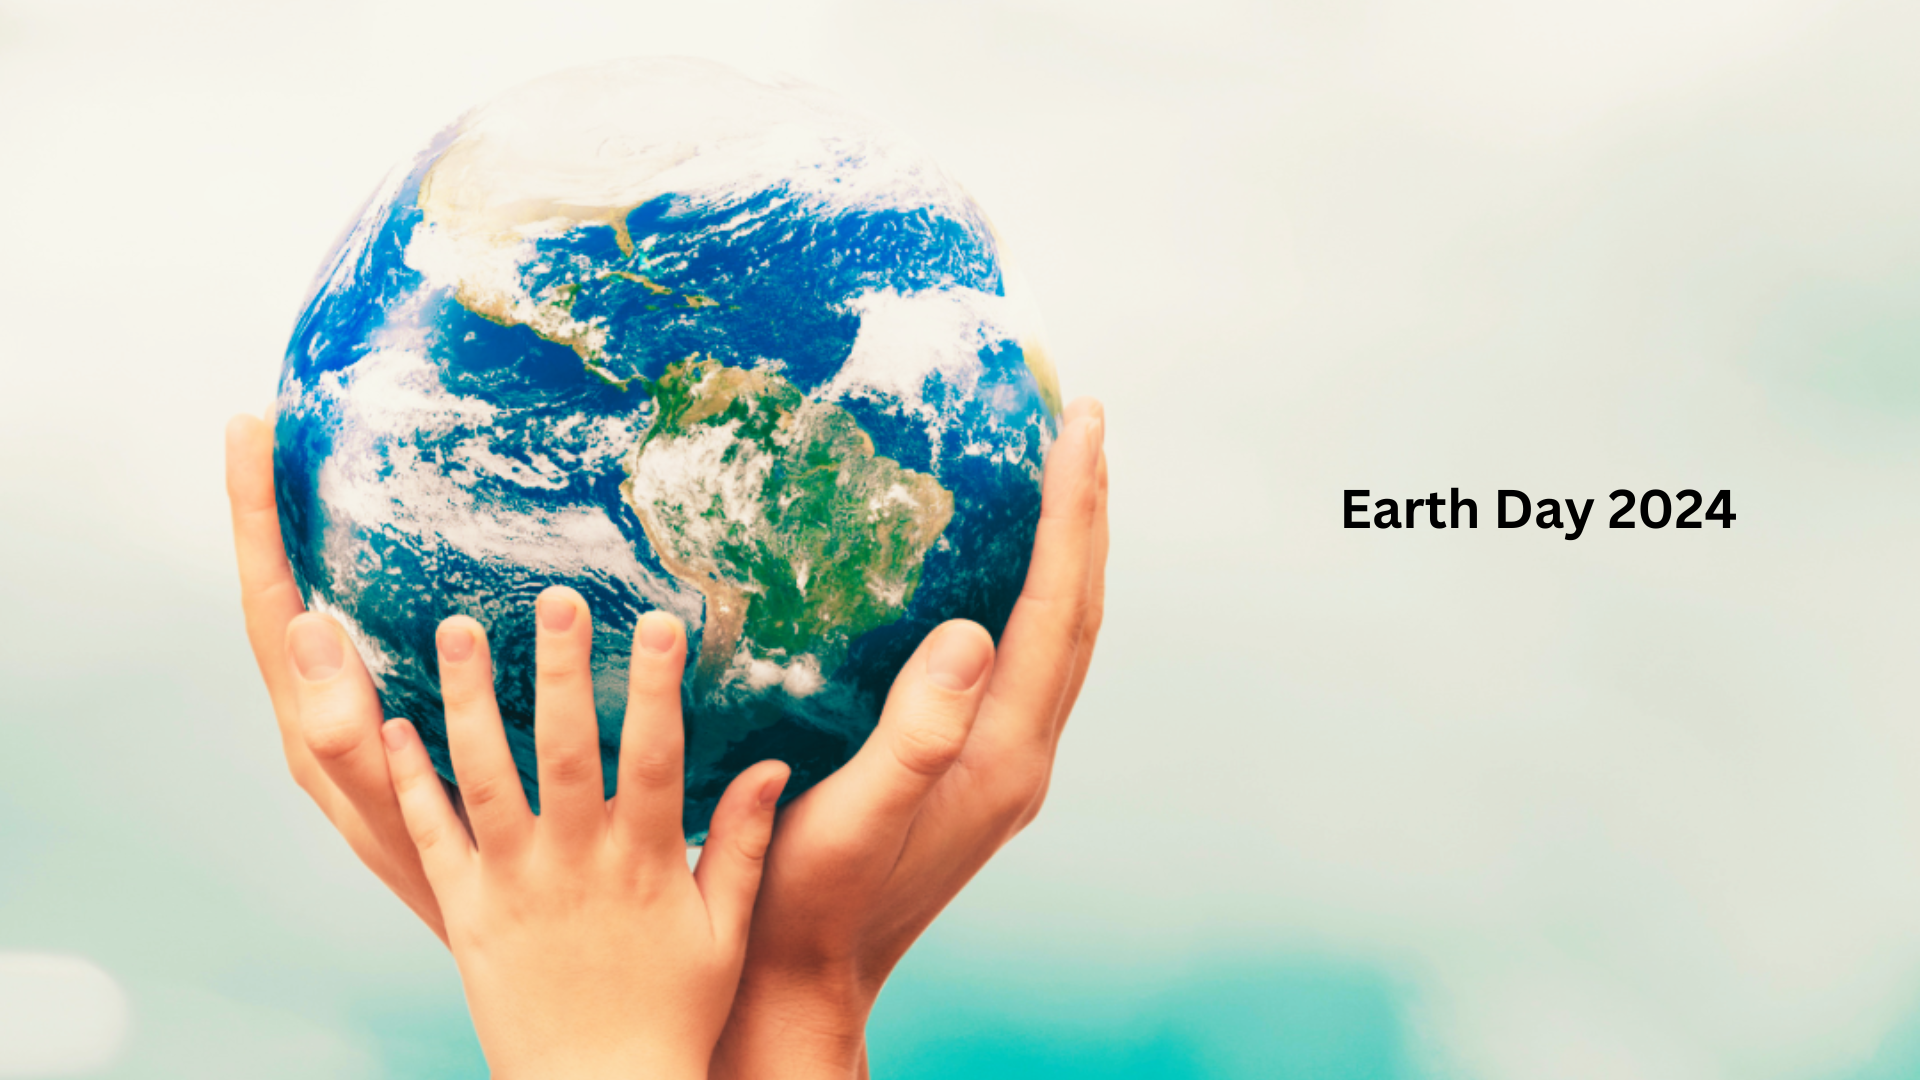 Earth Day 2024: Essential Details You Should Be Aware Of